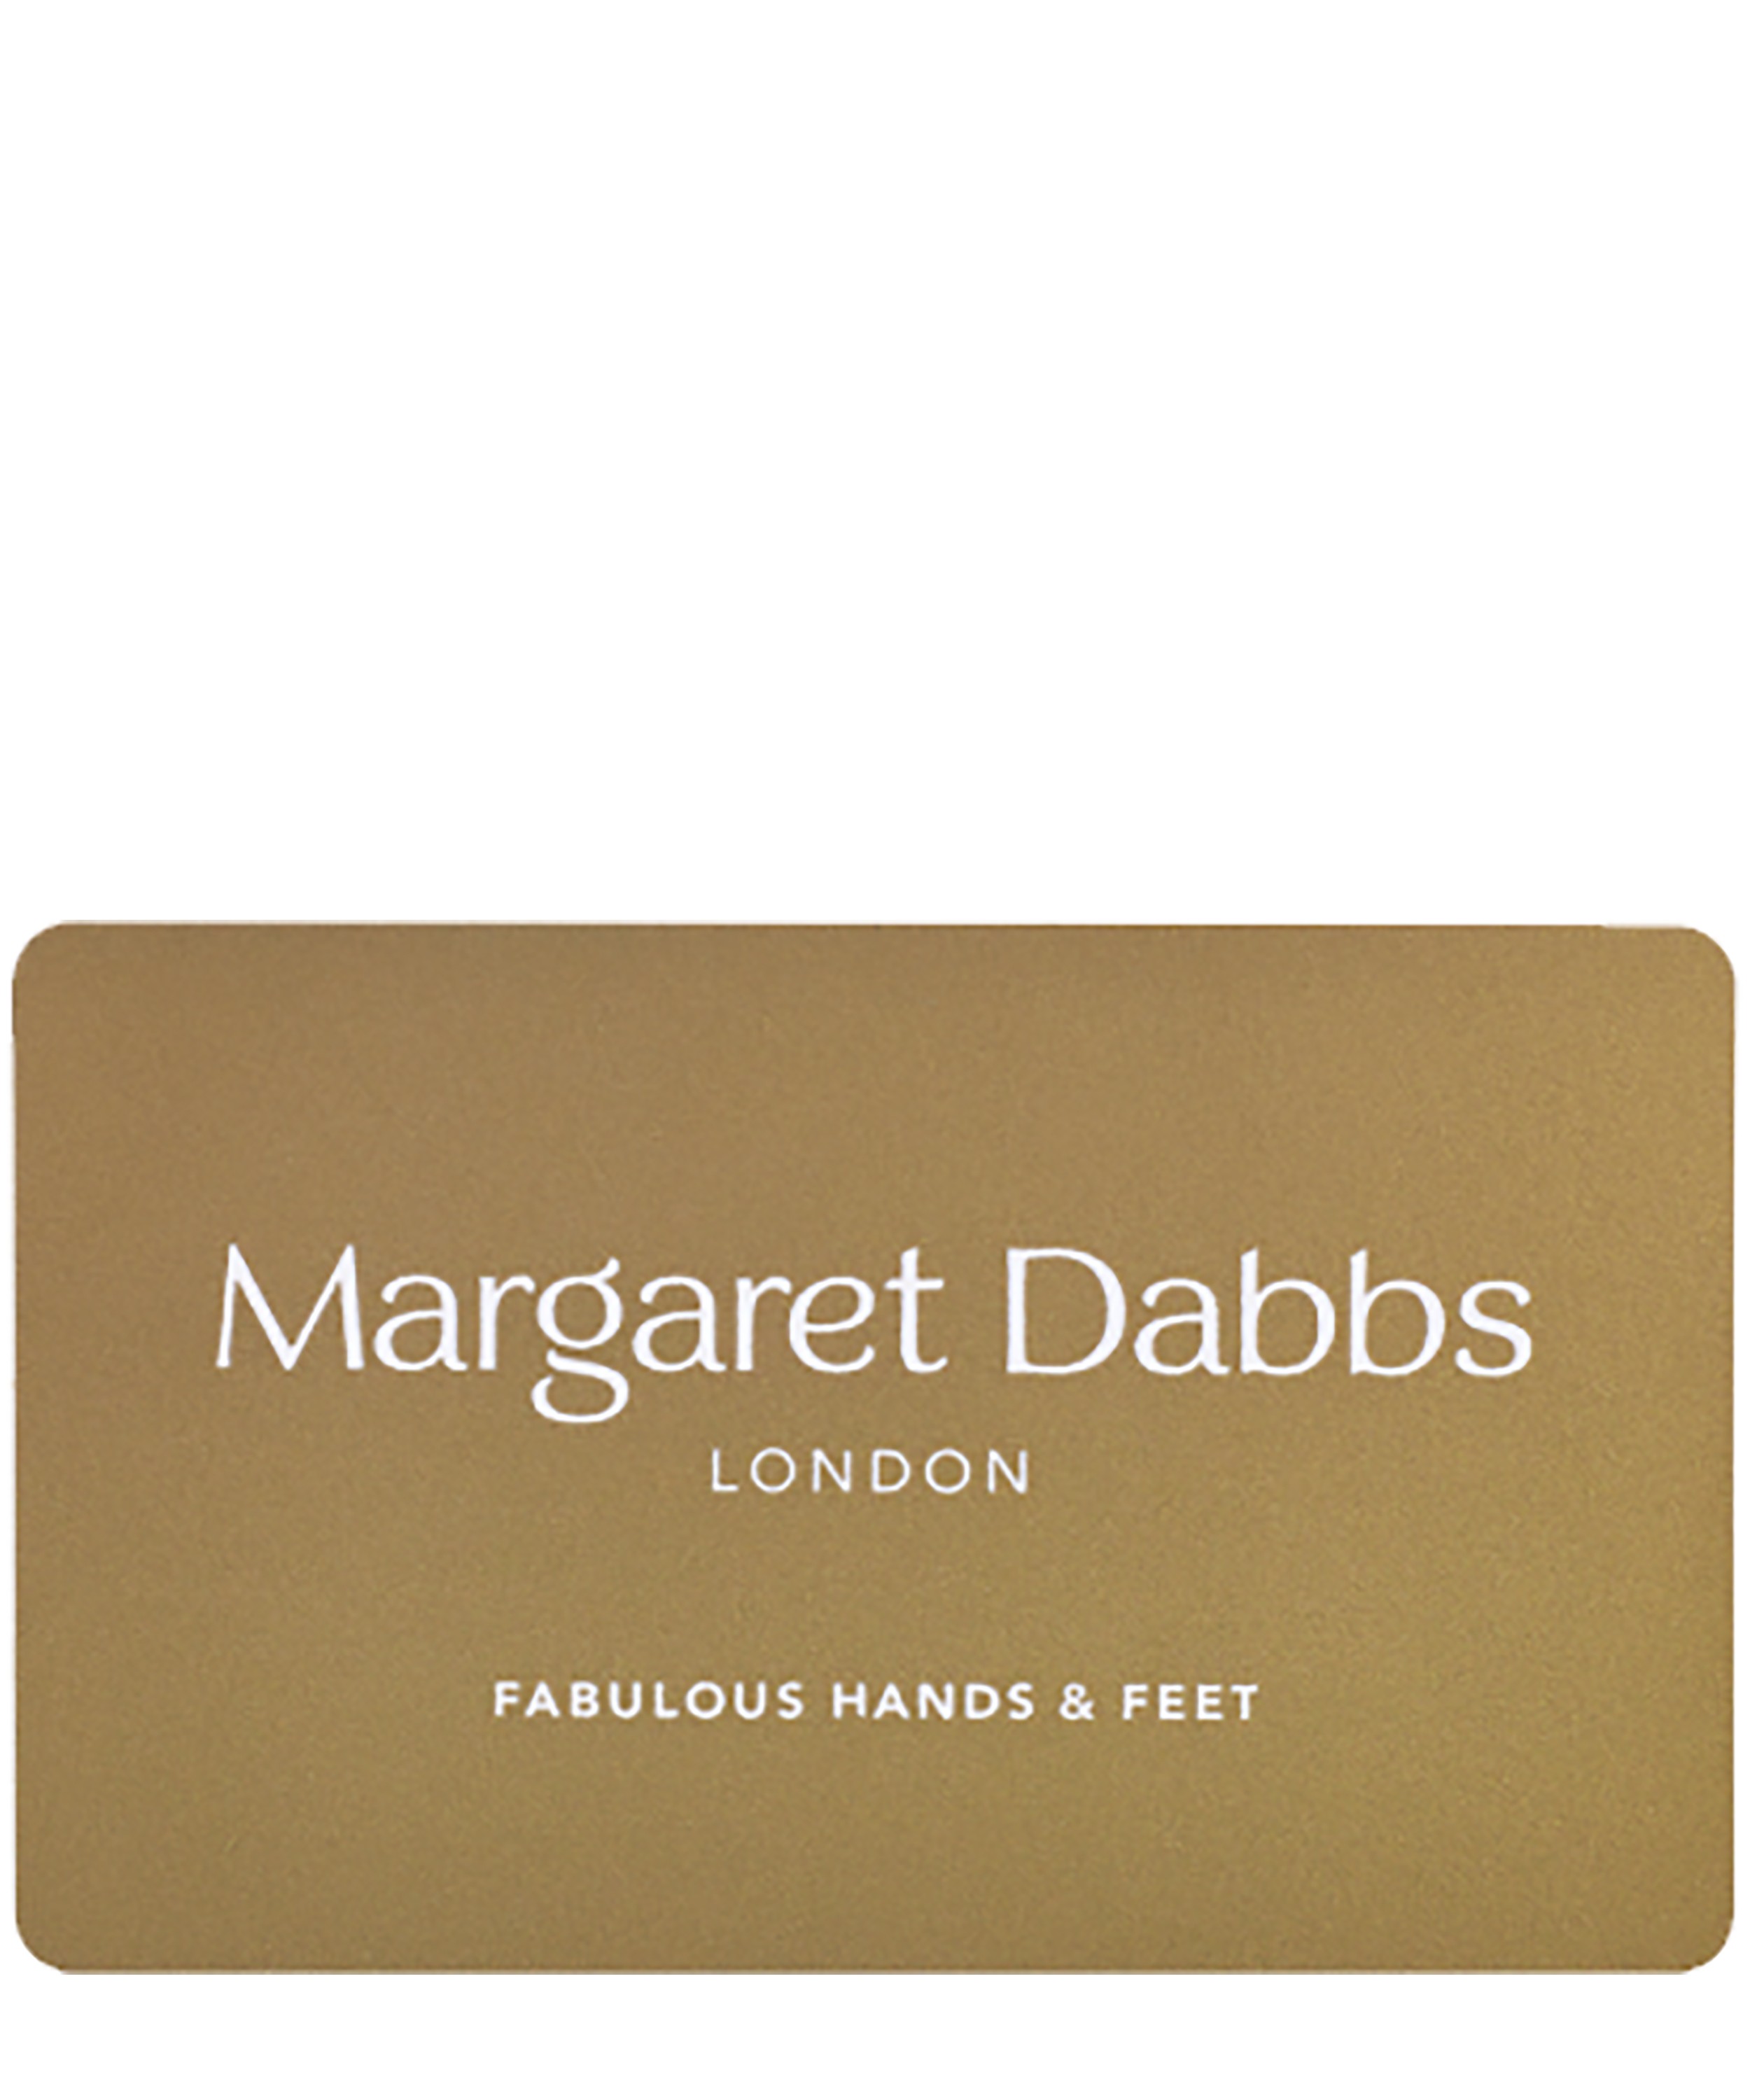 Margaret Dabbs London - Sole Spa Foot Detox Bath at Liberty image number null